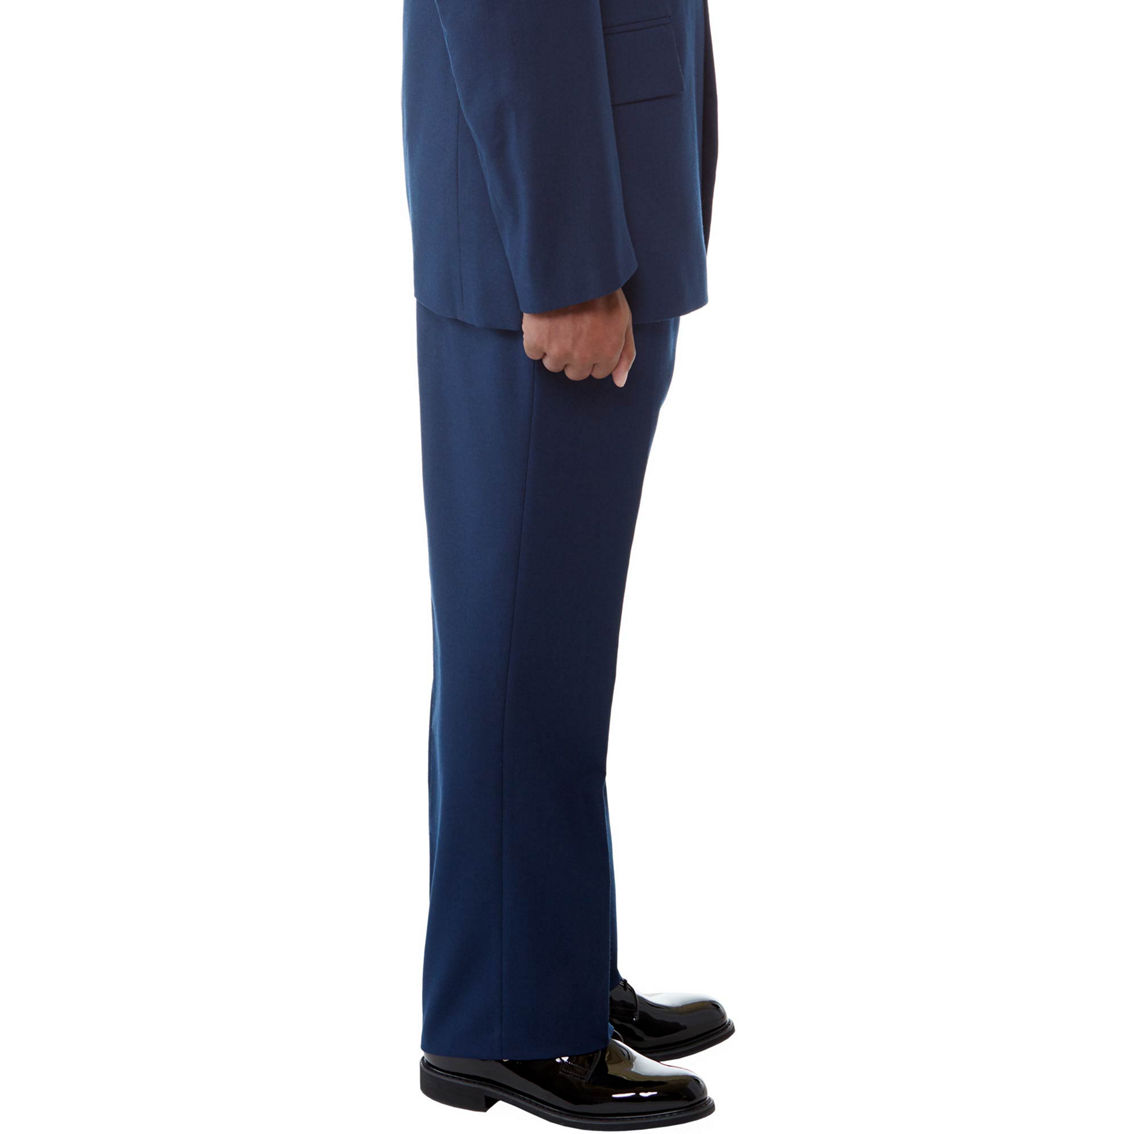 Commercial Male Air Force Service Dress Trousers - Image 4 of 4